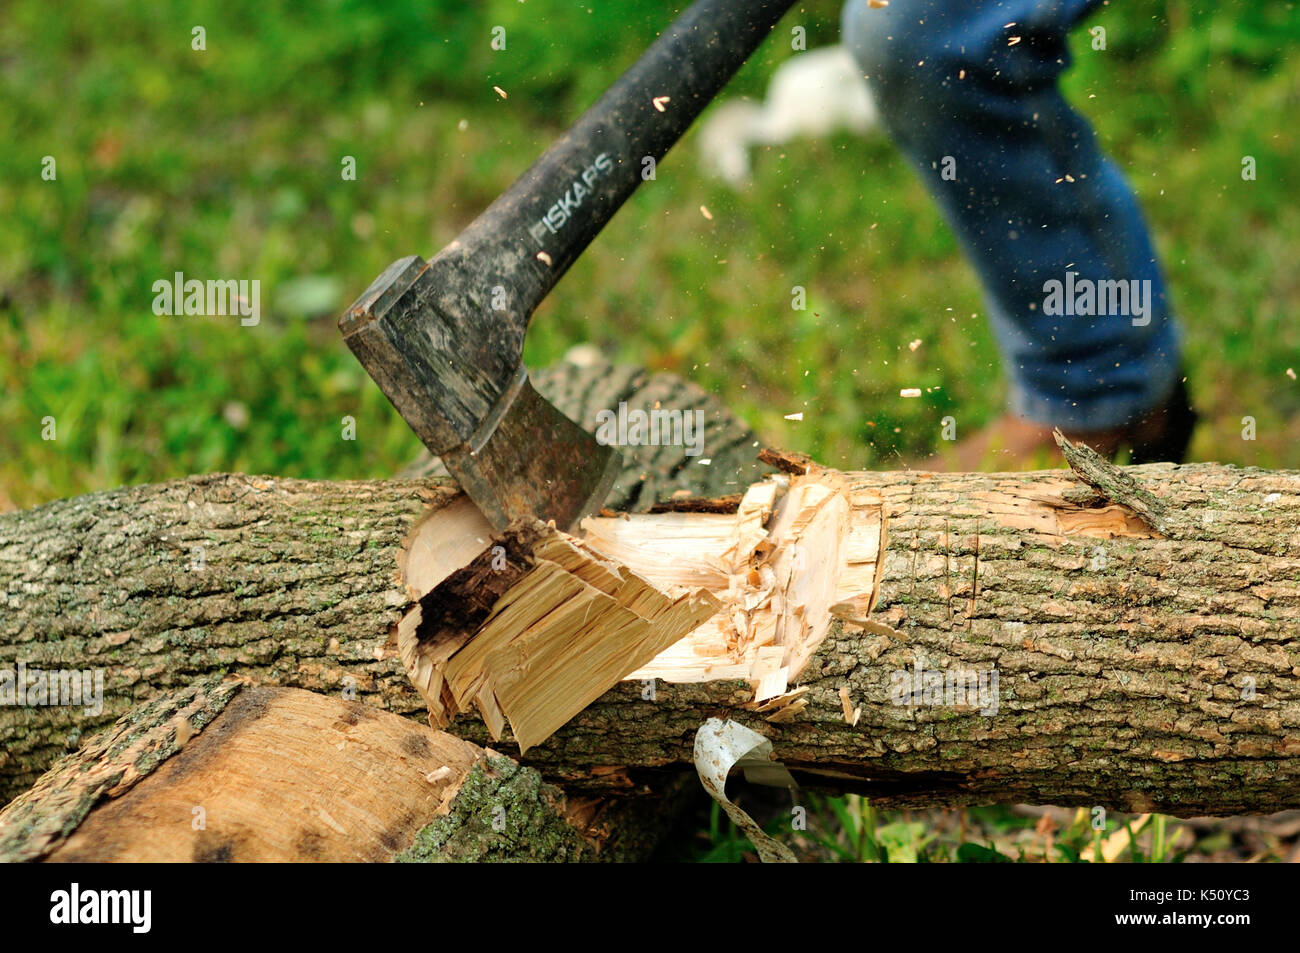 Man chopping wood with woodchips flying Stock Photo